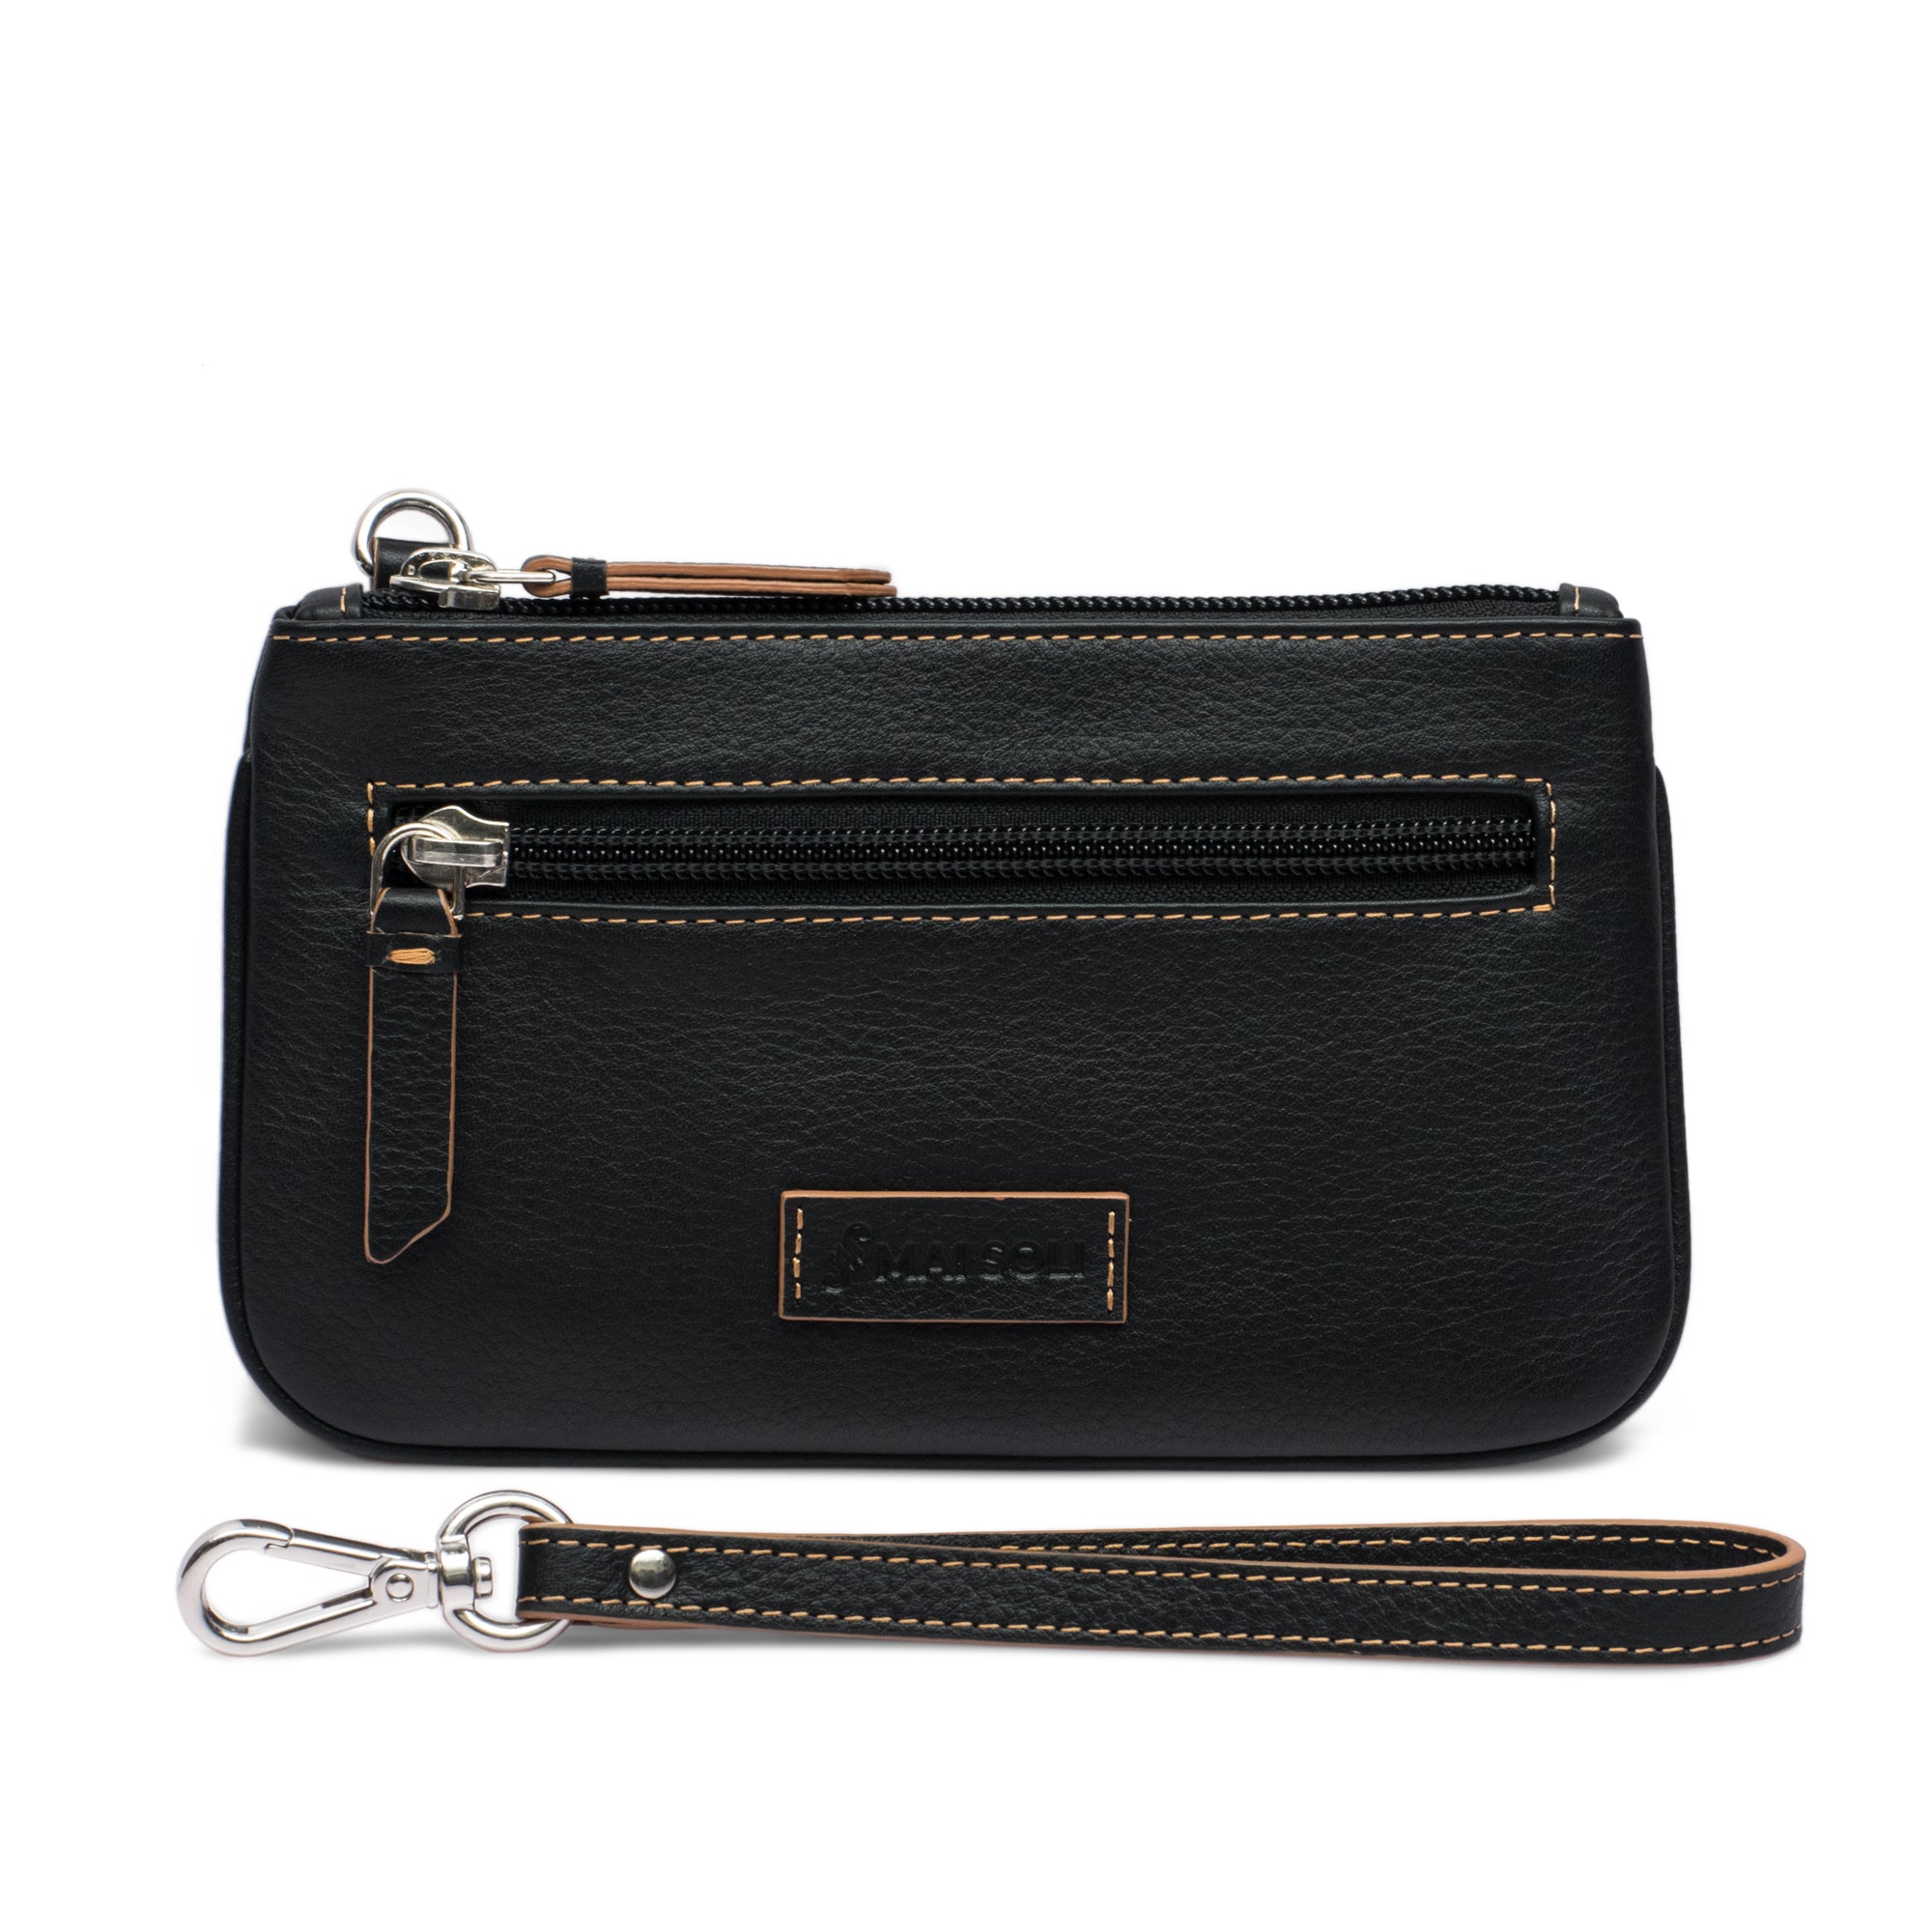 Daily Pouch as a wristlet?